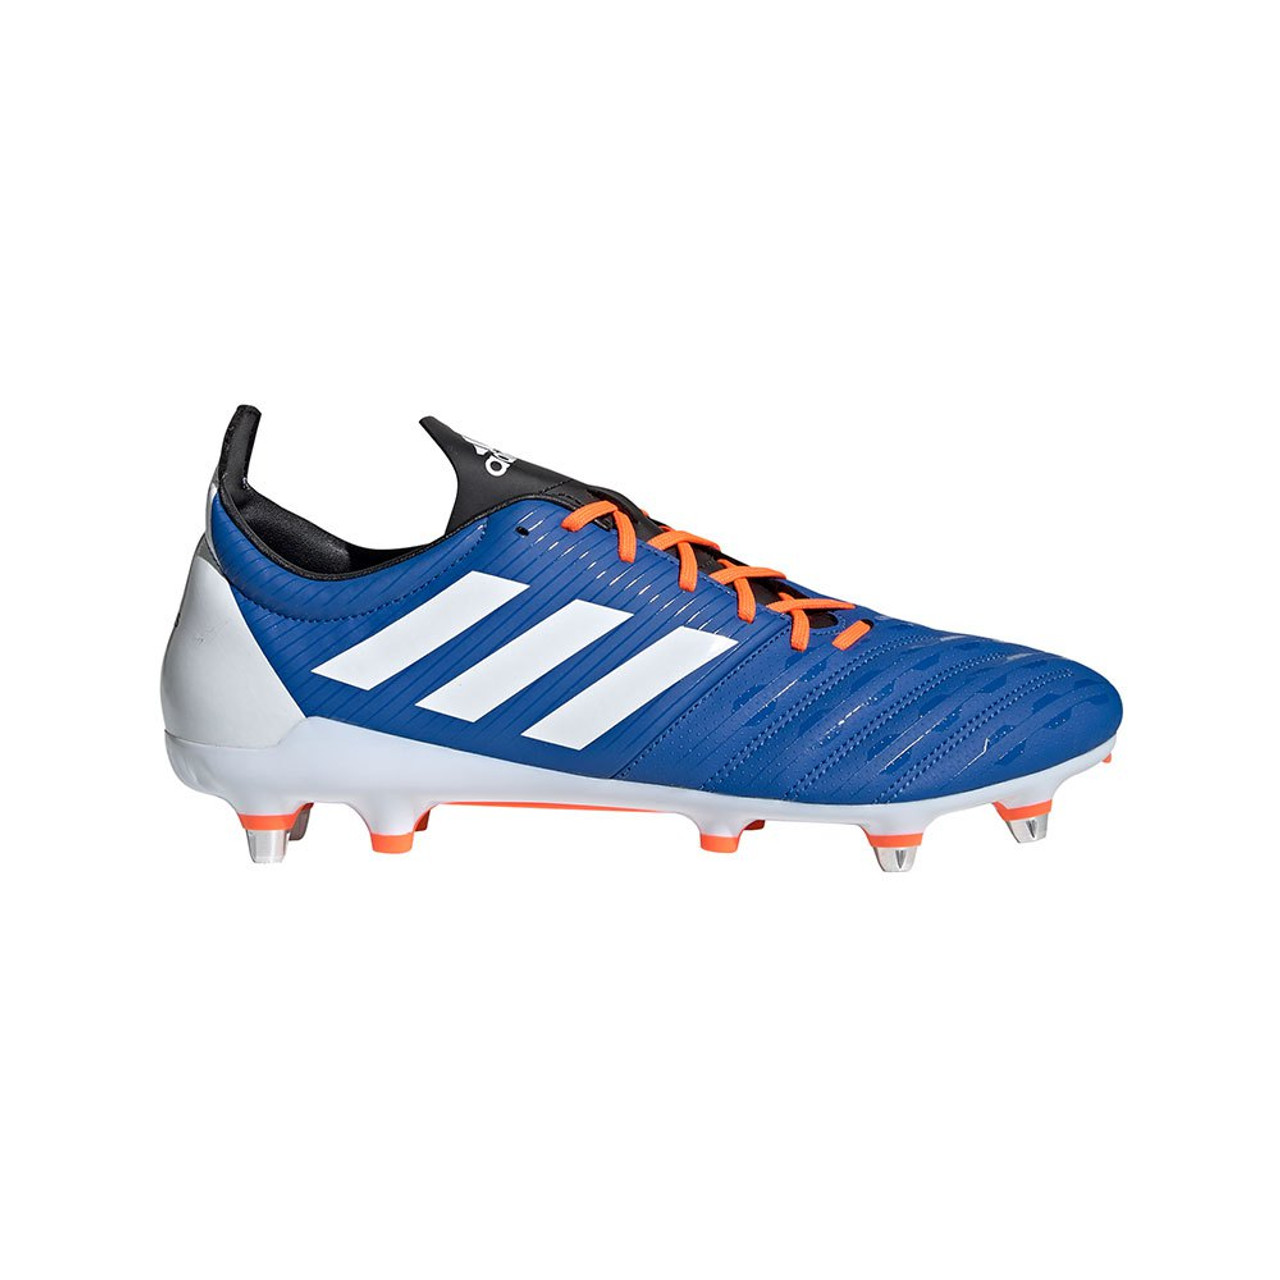 Adidas Malice Sg Rugby Boots Blue White Orange On Sale At